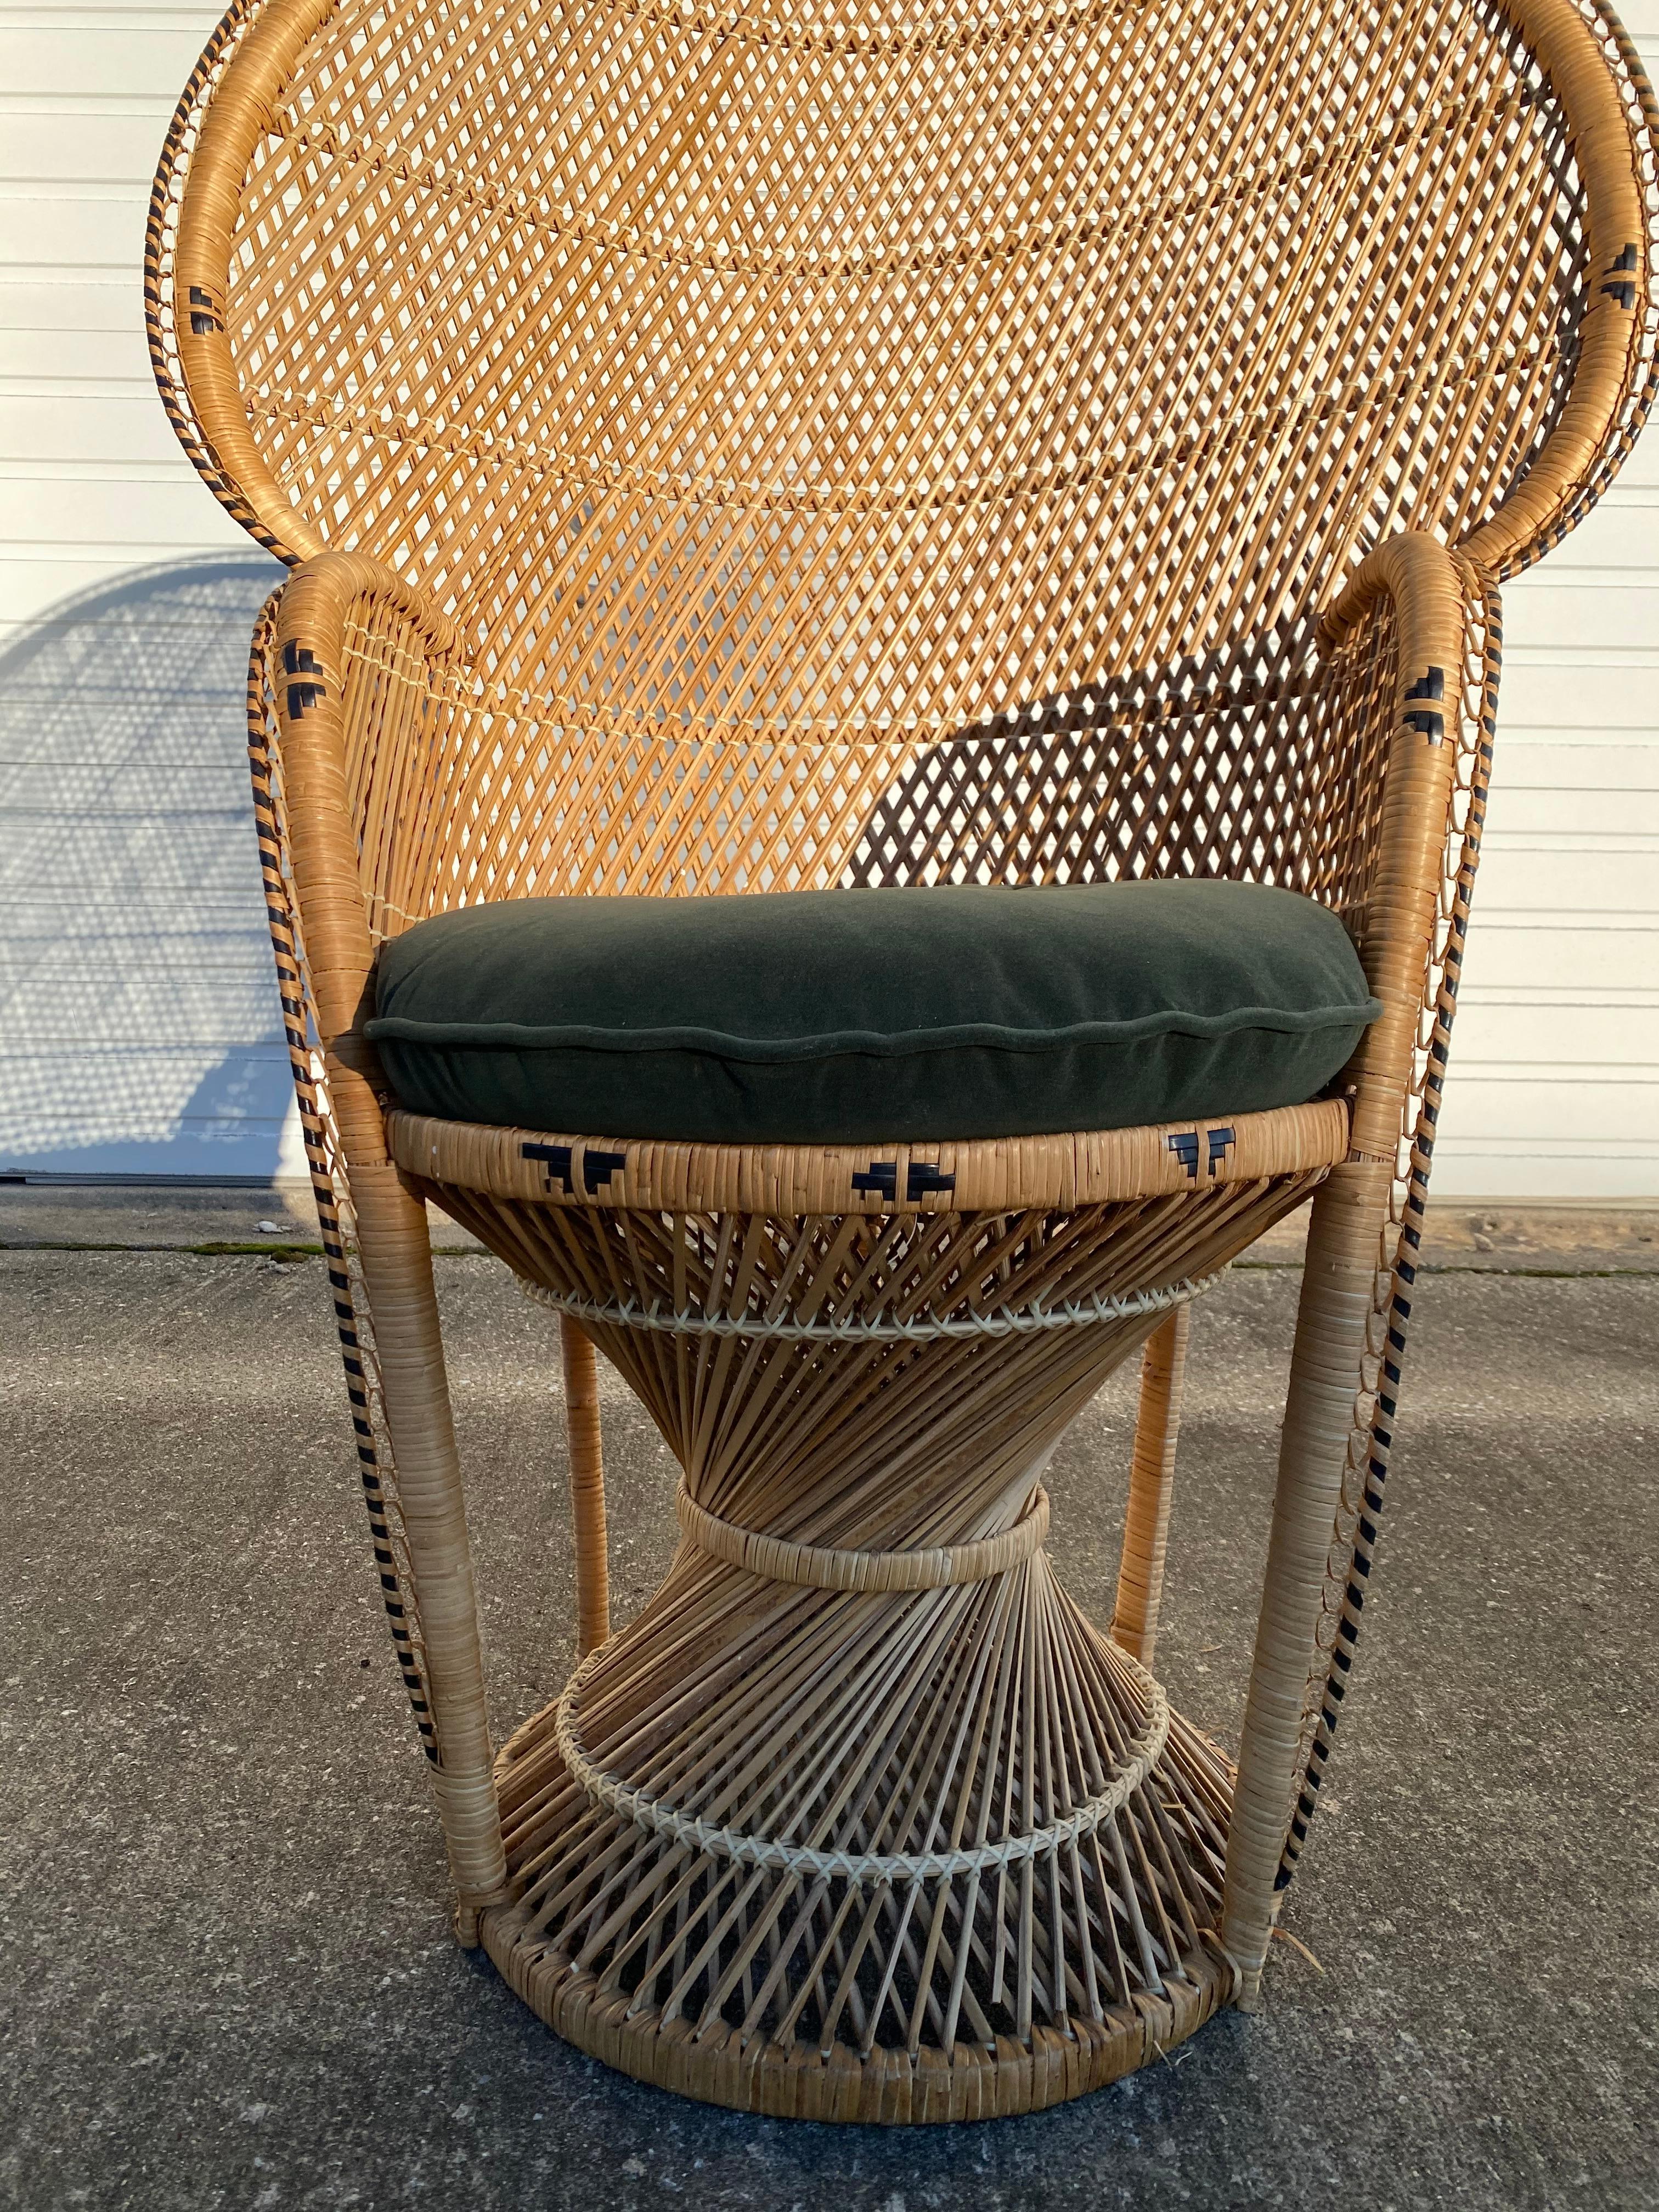 Vintage Boho Chic Beige & Black Wicker Peacock Chair with New Cushion 1